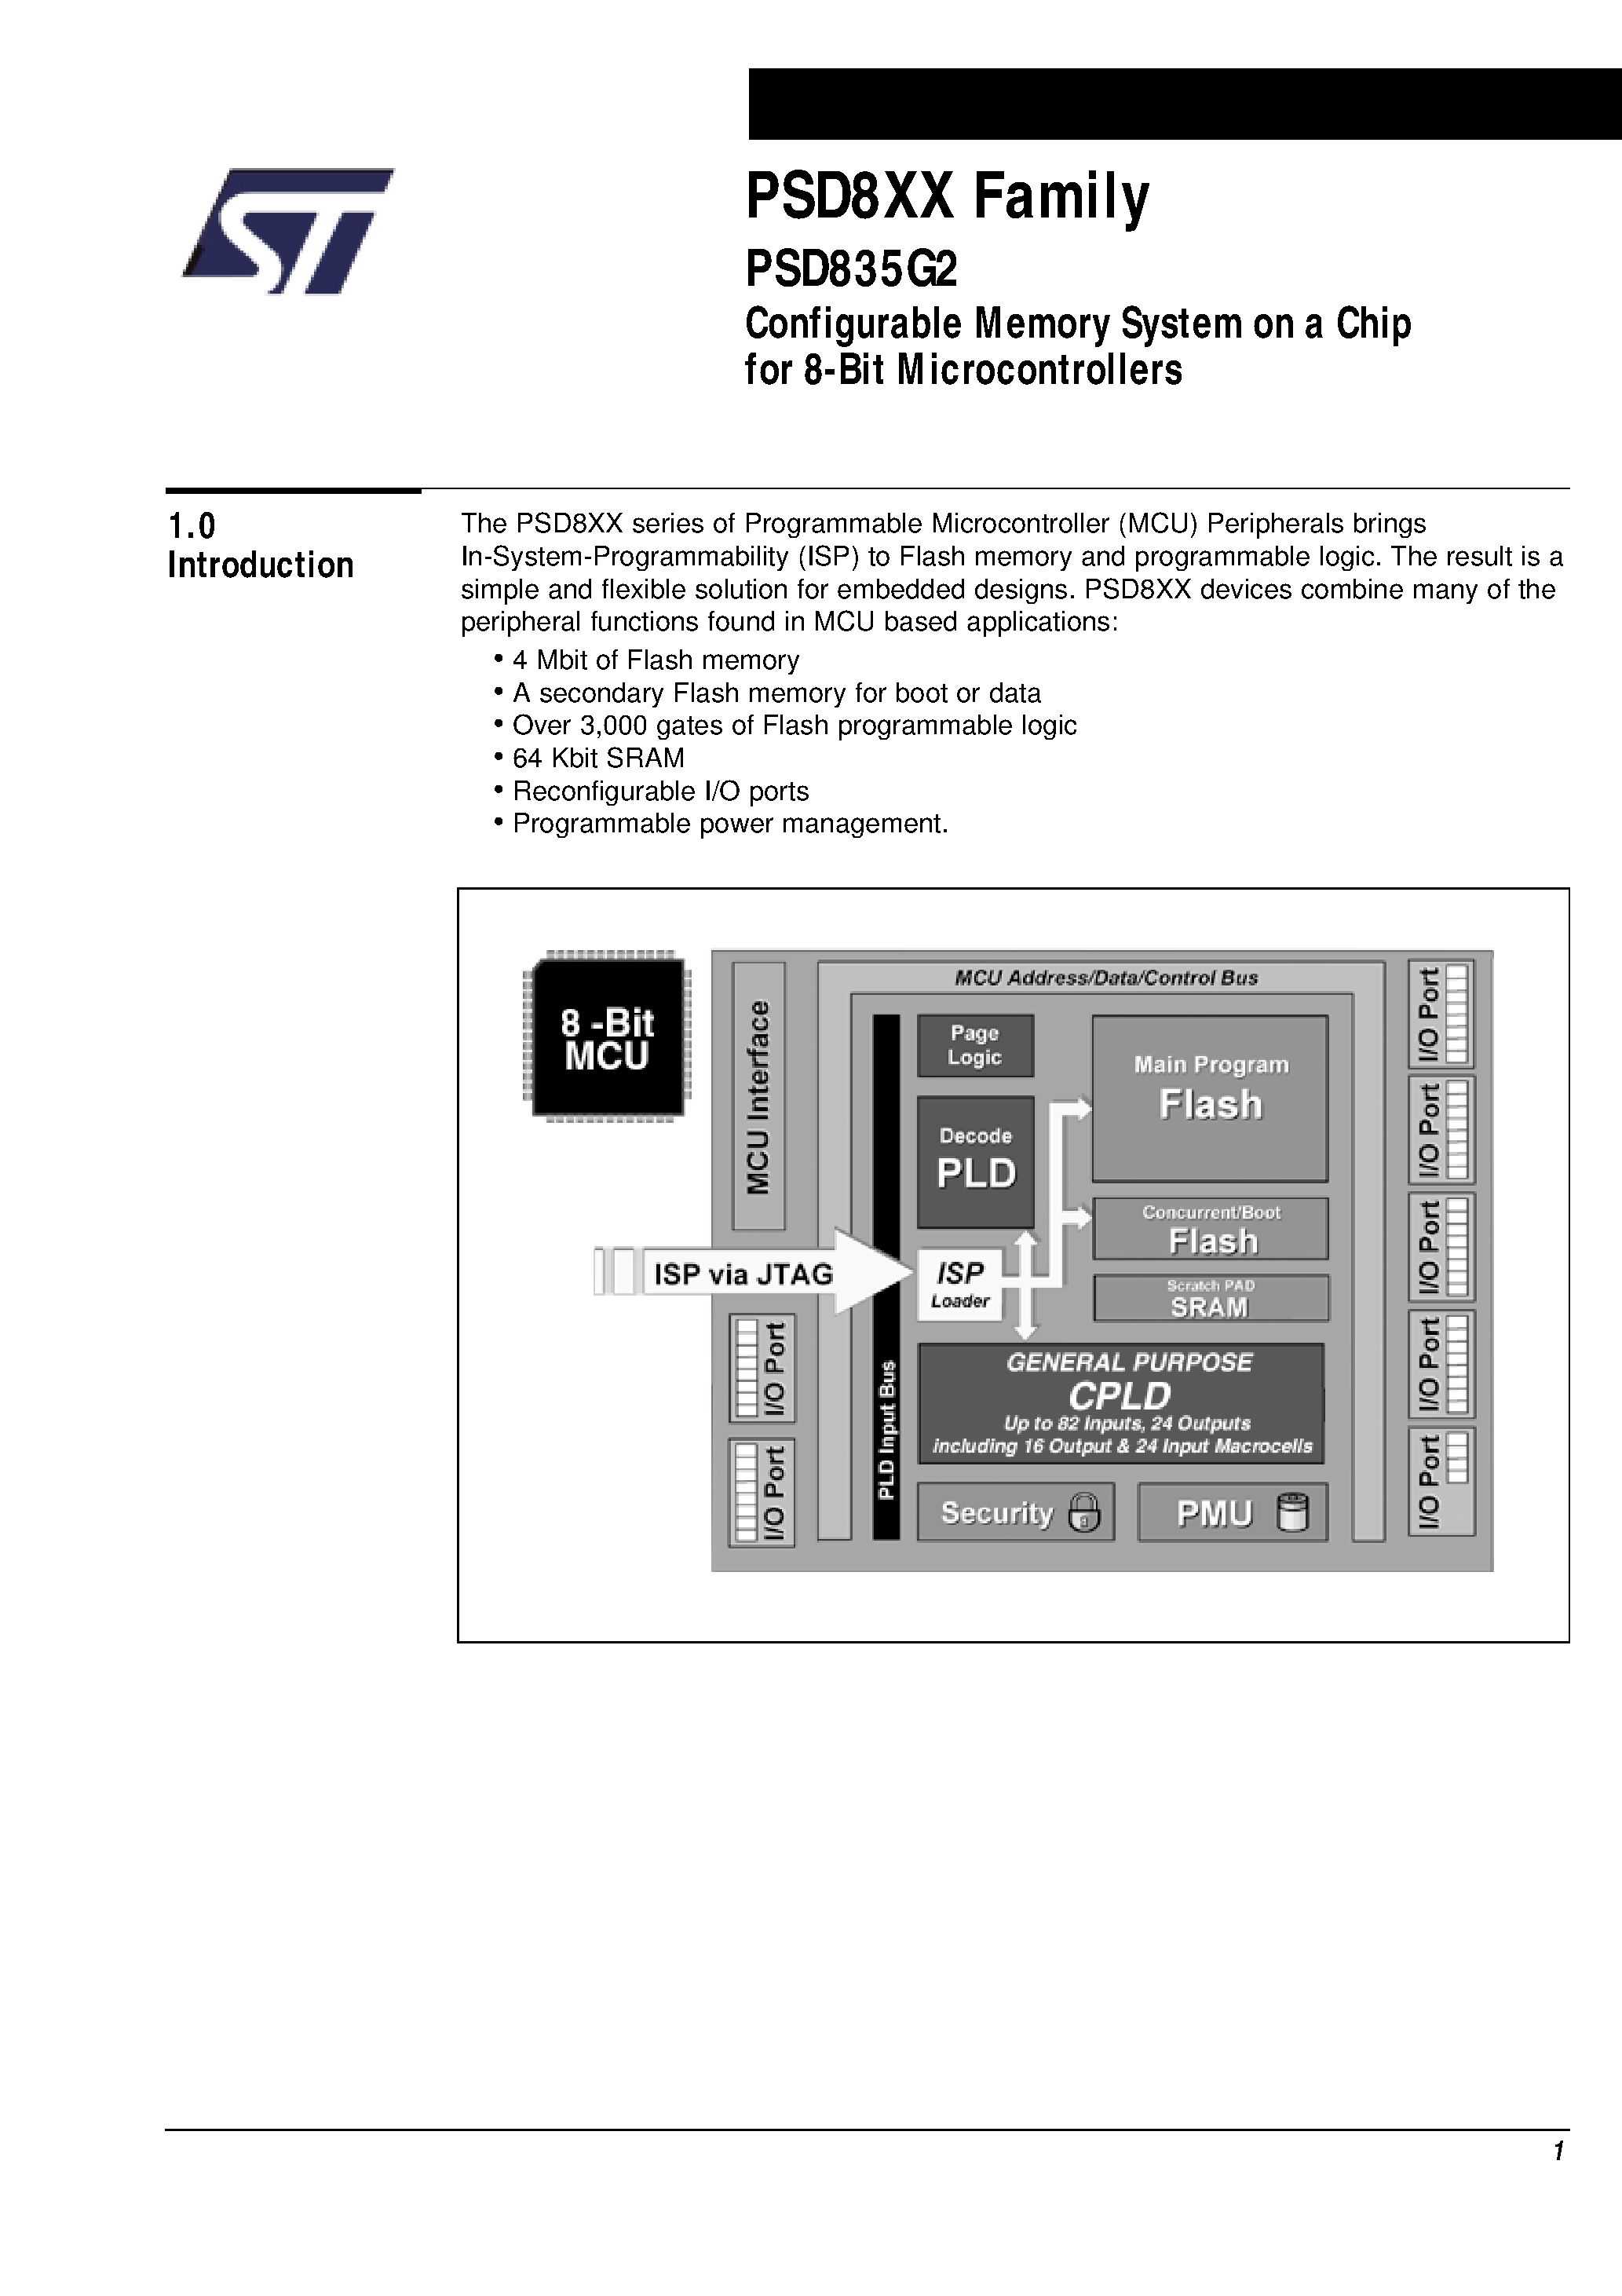 Datasheet PSD835F2-A-70B81 - Configurable Memory System on a Chip for 8-Bit Microcontrollers page 2